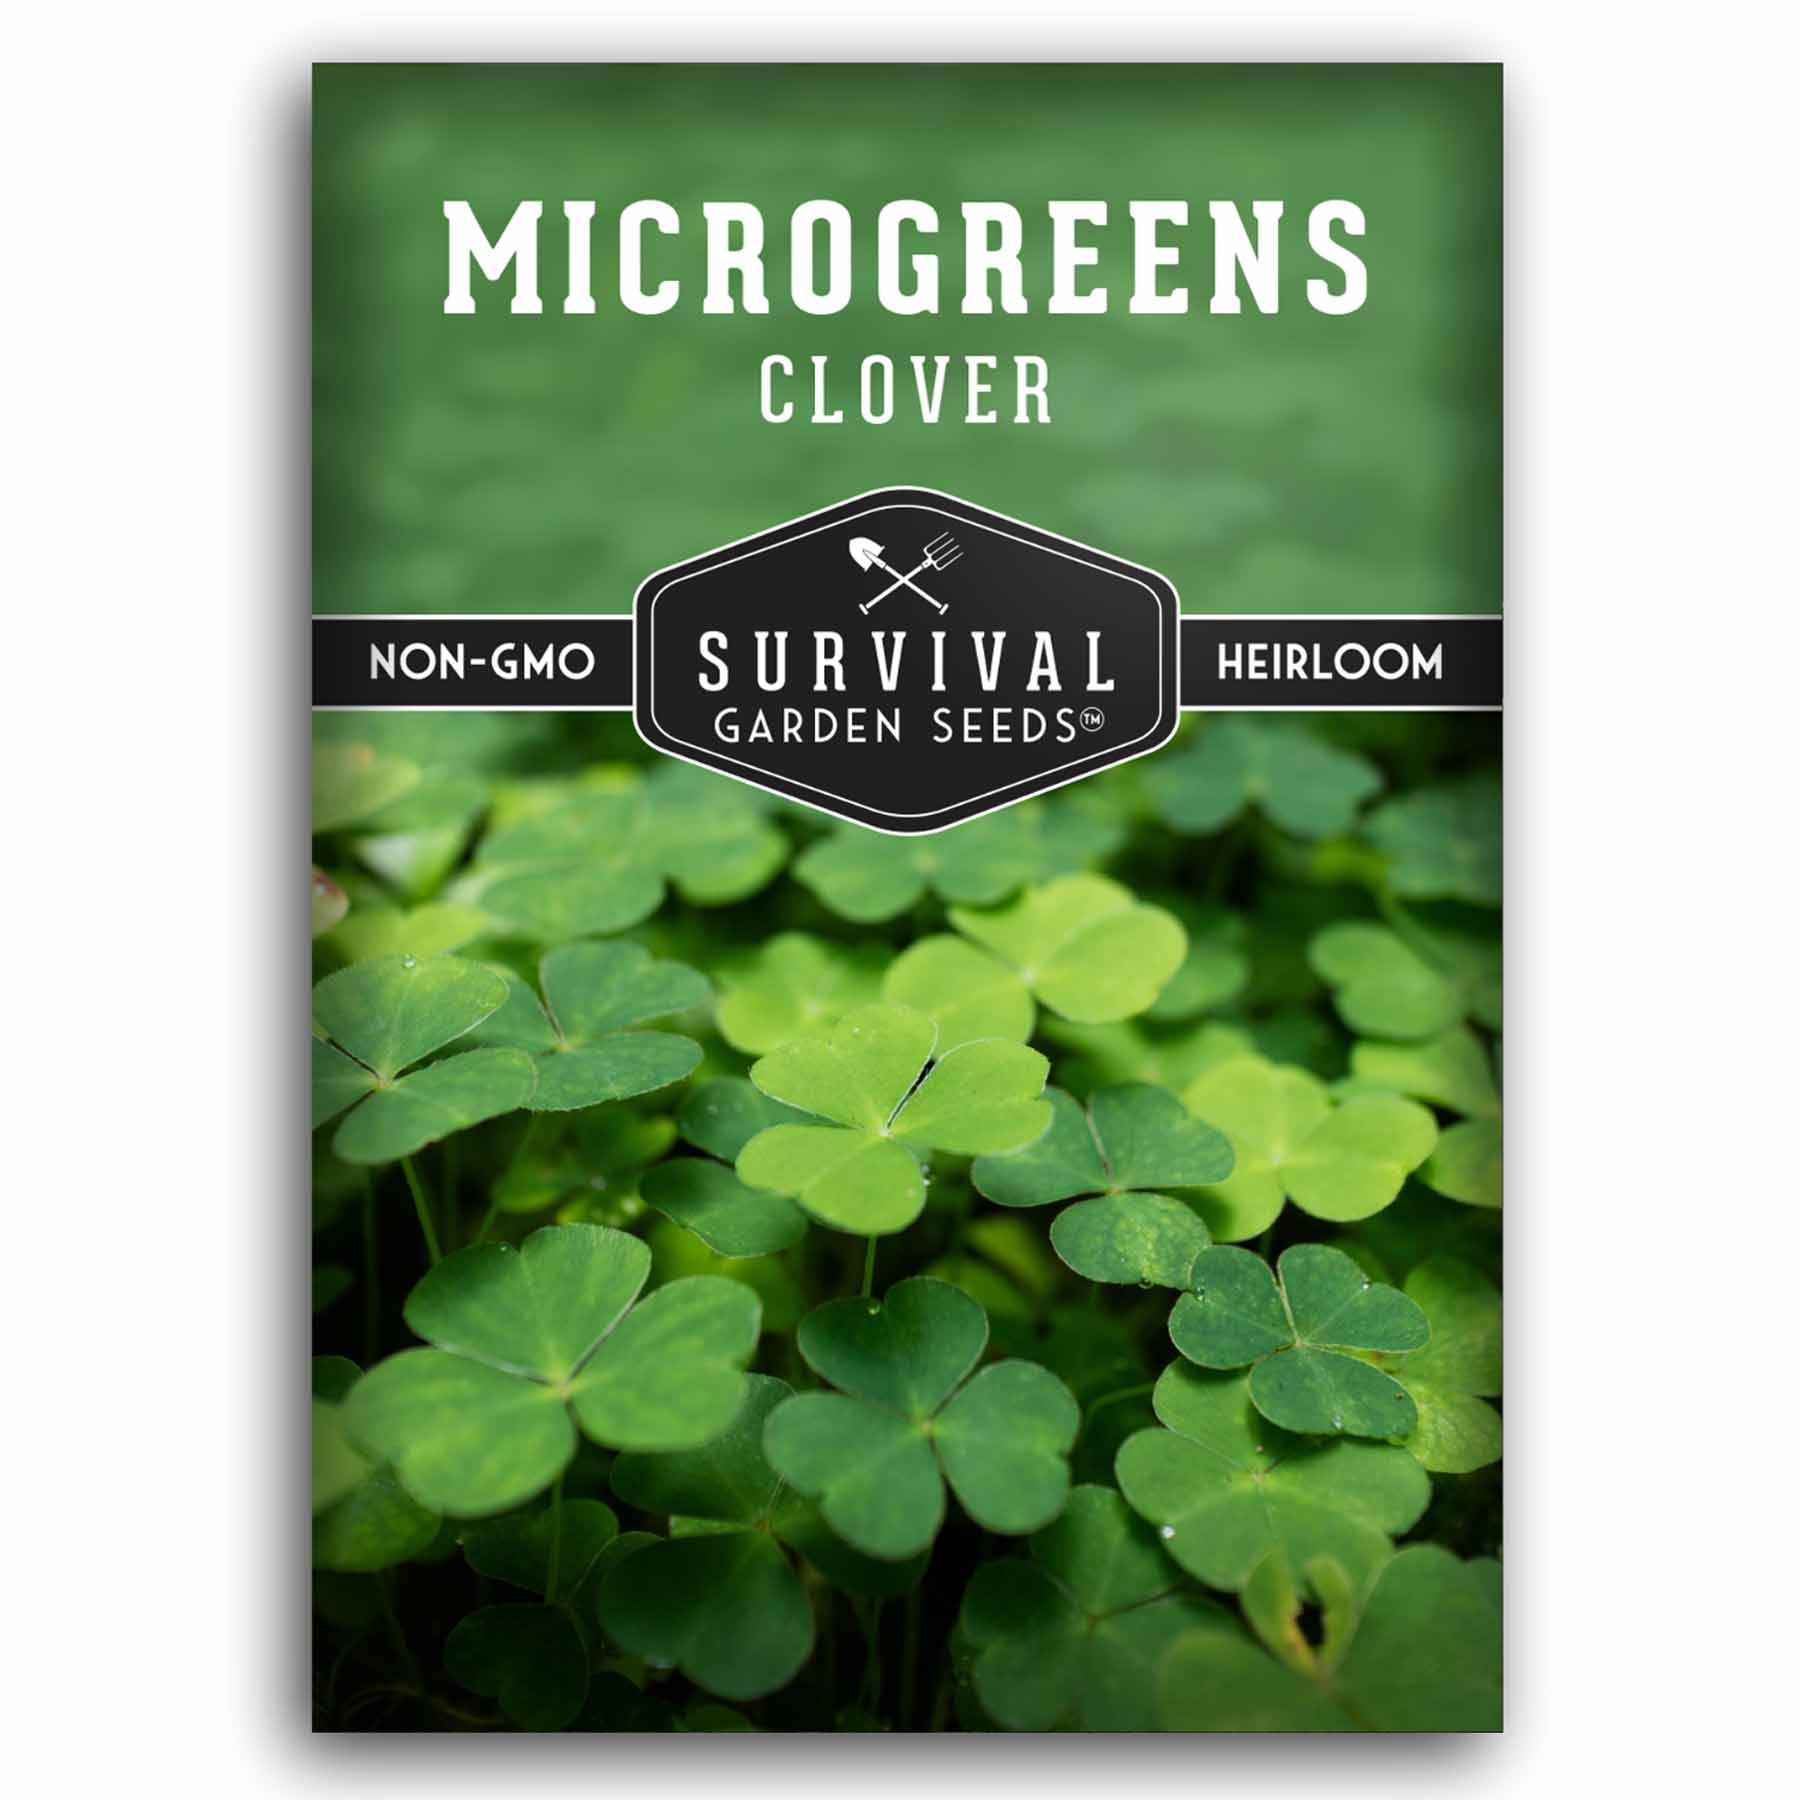 1 pack of Clover Microgreens seeds